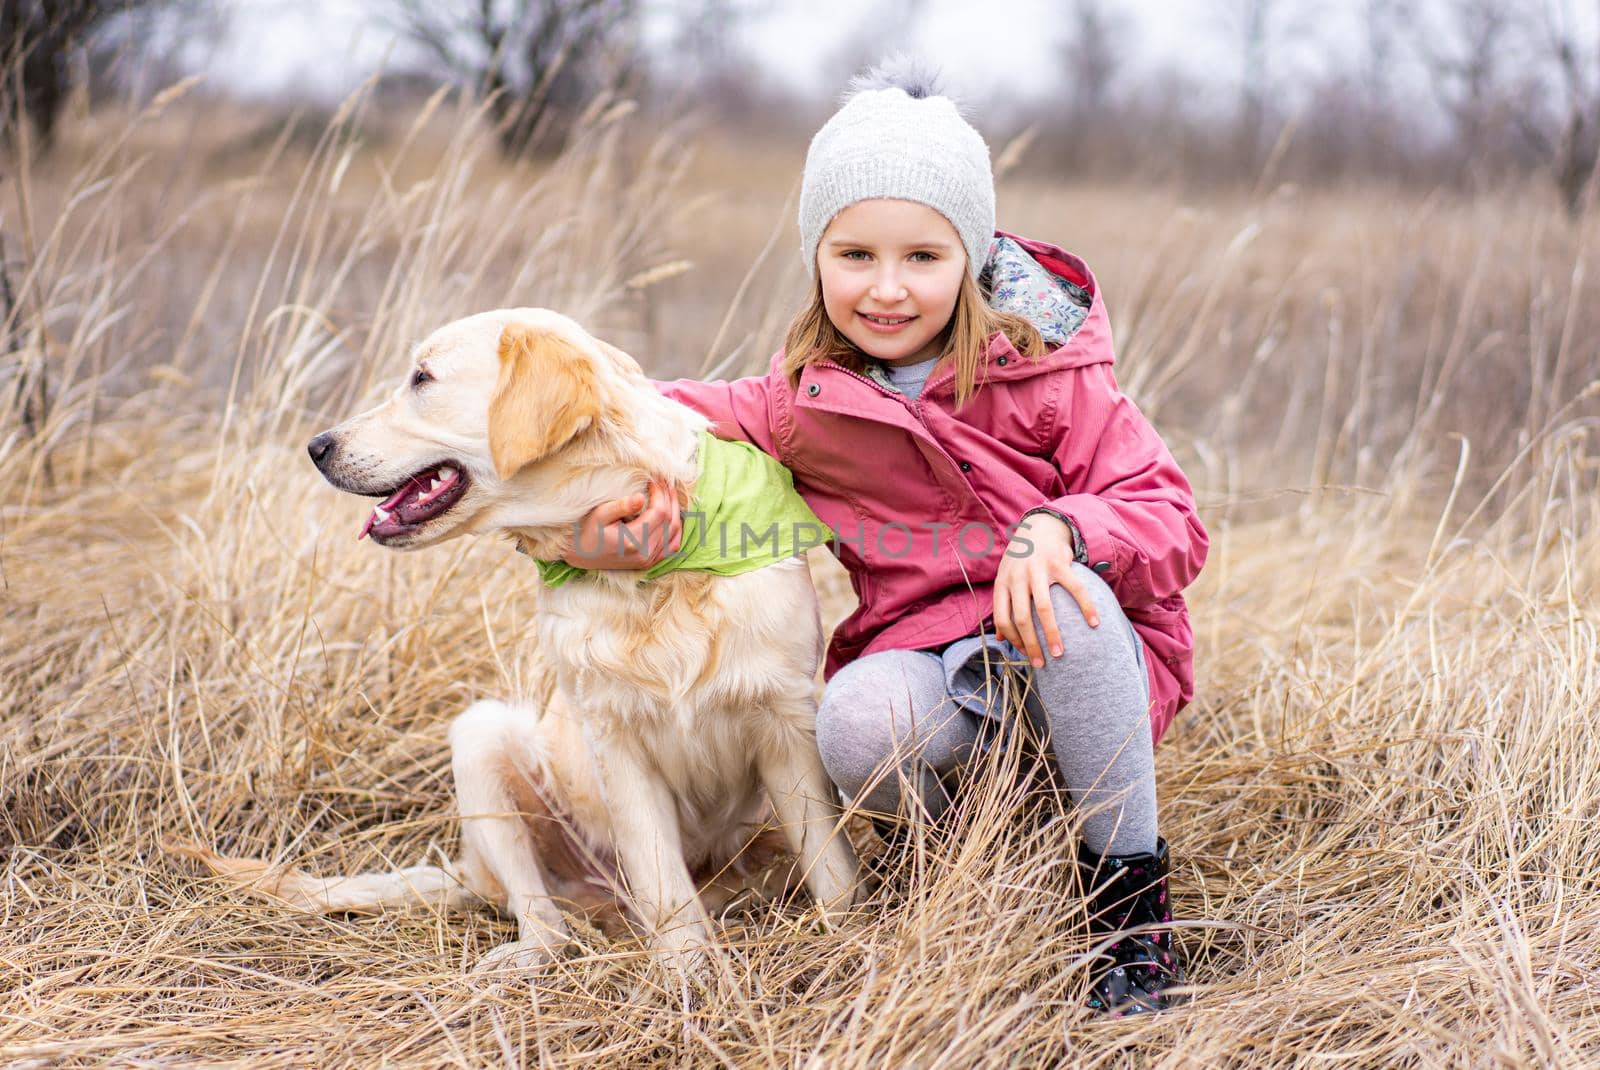 Little girl with cute dog in high dry grass